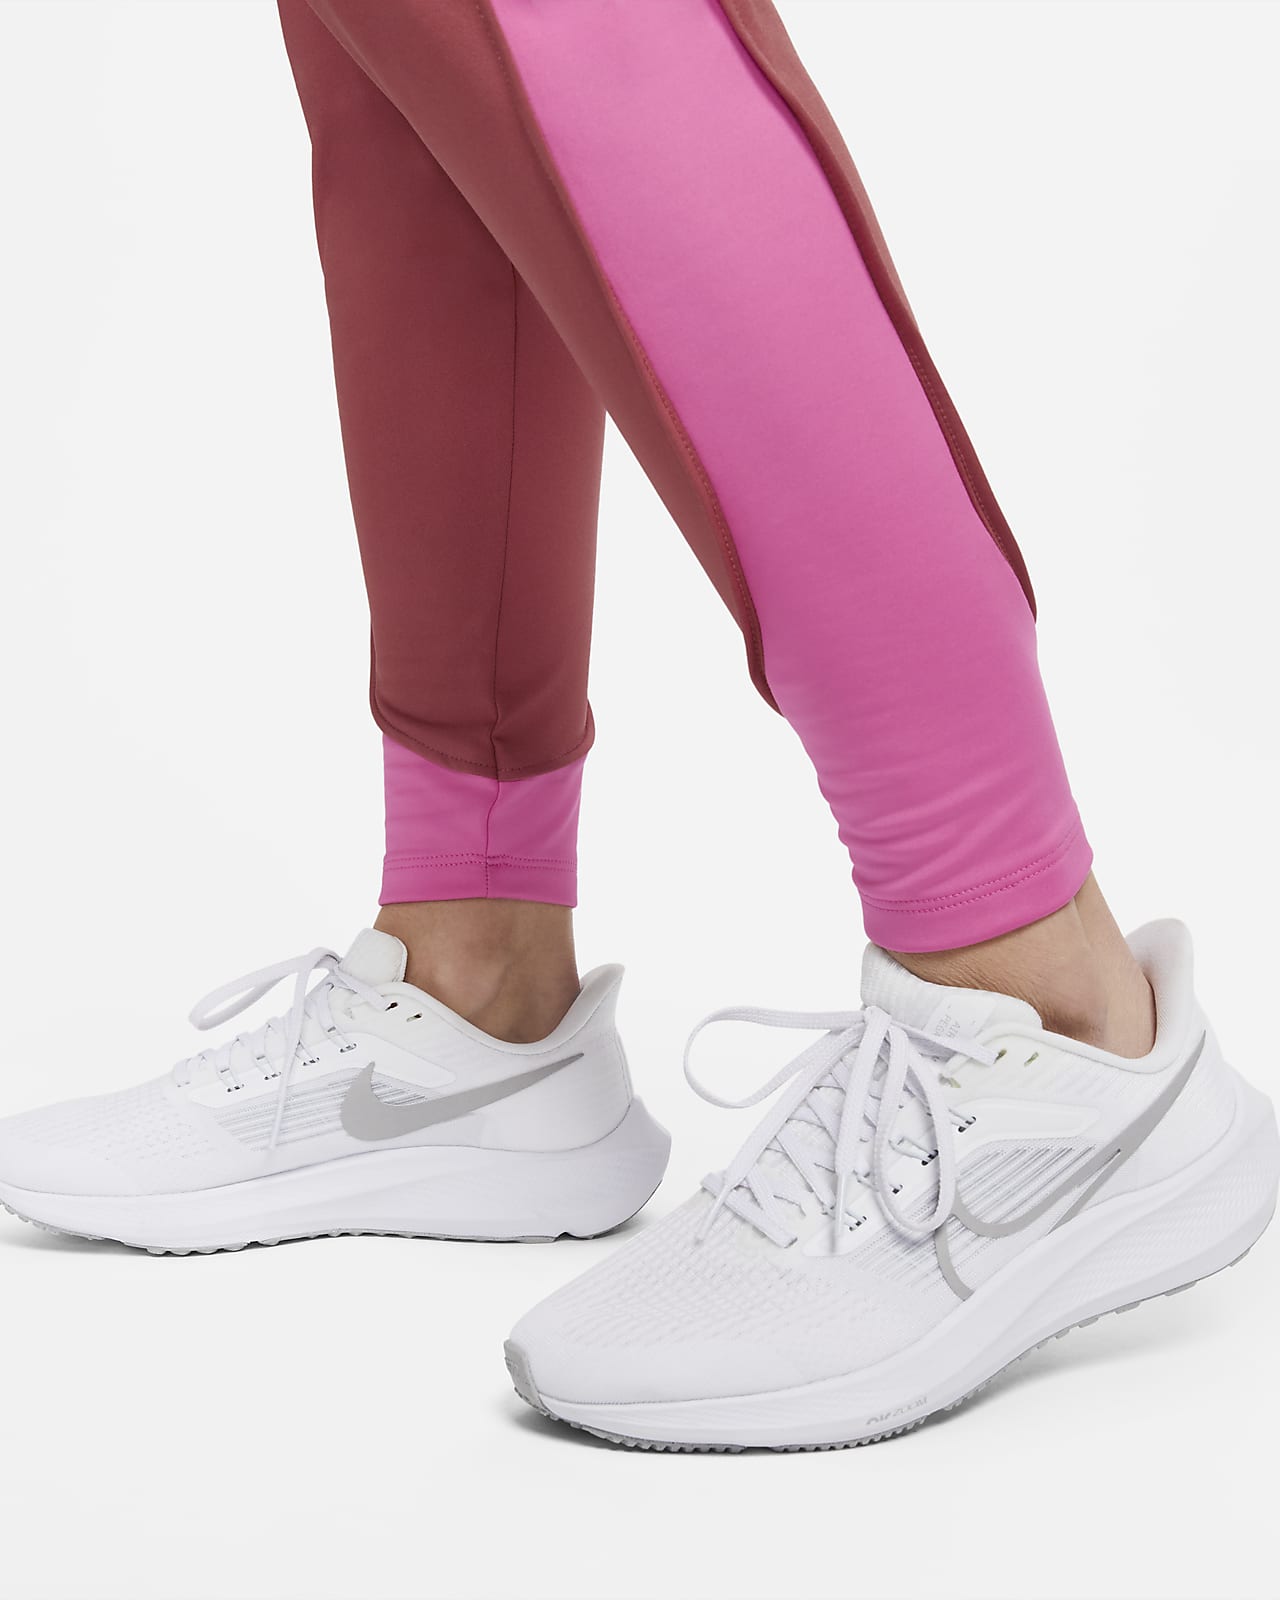 Nike Therma-FIT Women's Running Pants.